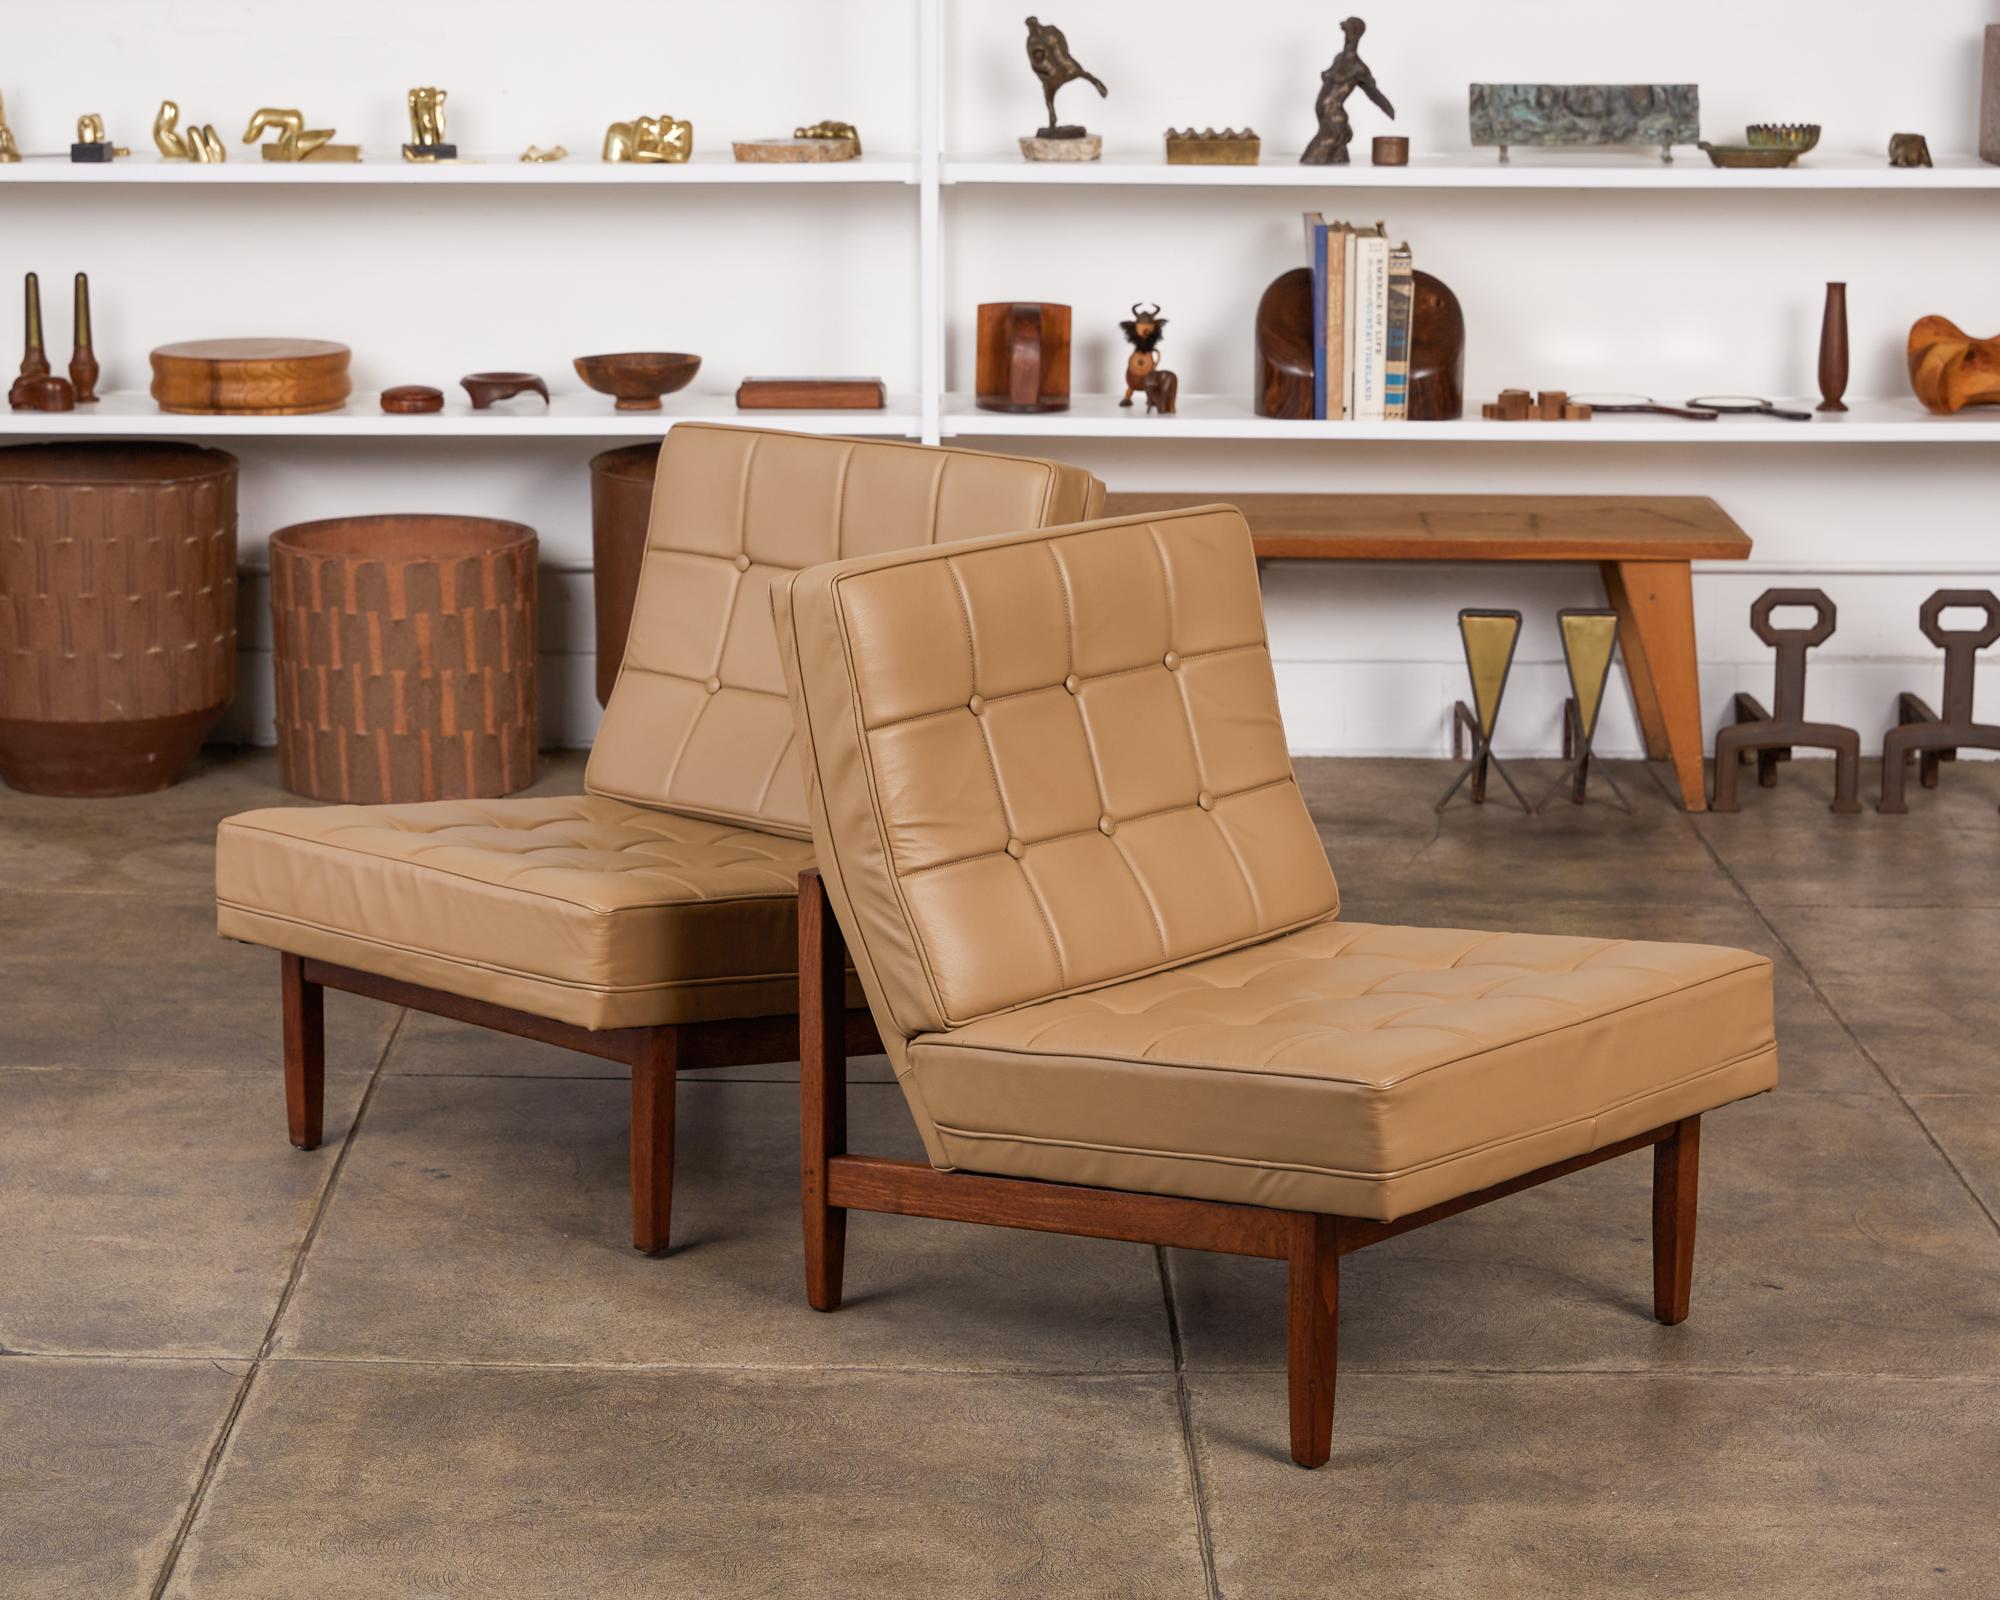 Pair of slipper lounge chairs by Florence Knoll, USA, circa 1950s. The chairs feature a walnut frame with attached tufted leather back and seat cushions. A Classic design by one of the matriarchs of American Modernist furniture